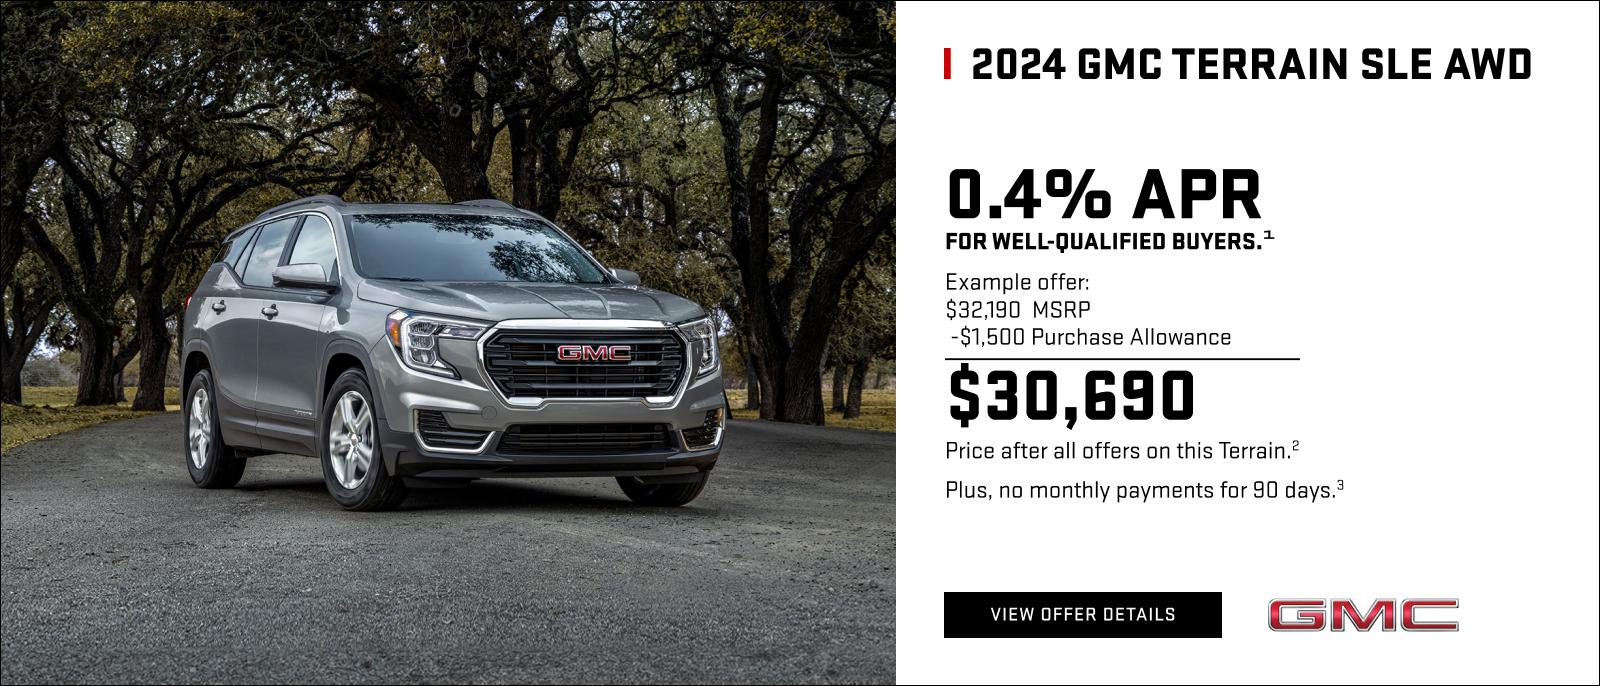 0.4% APR for well-qualified buyers.1

Example offer:
$32,190 MSRP
$1,500 Purchase Allowance
$30,690 Price after all offers on this Terrain.2

Plus, no monthly payments for 90 days. 3